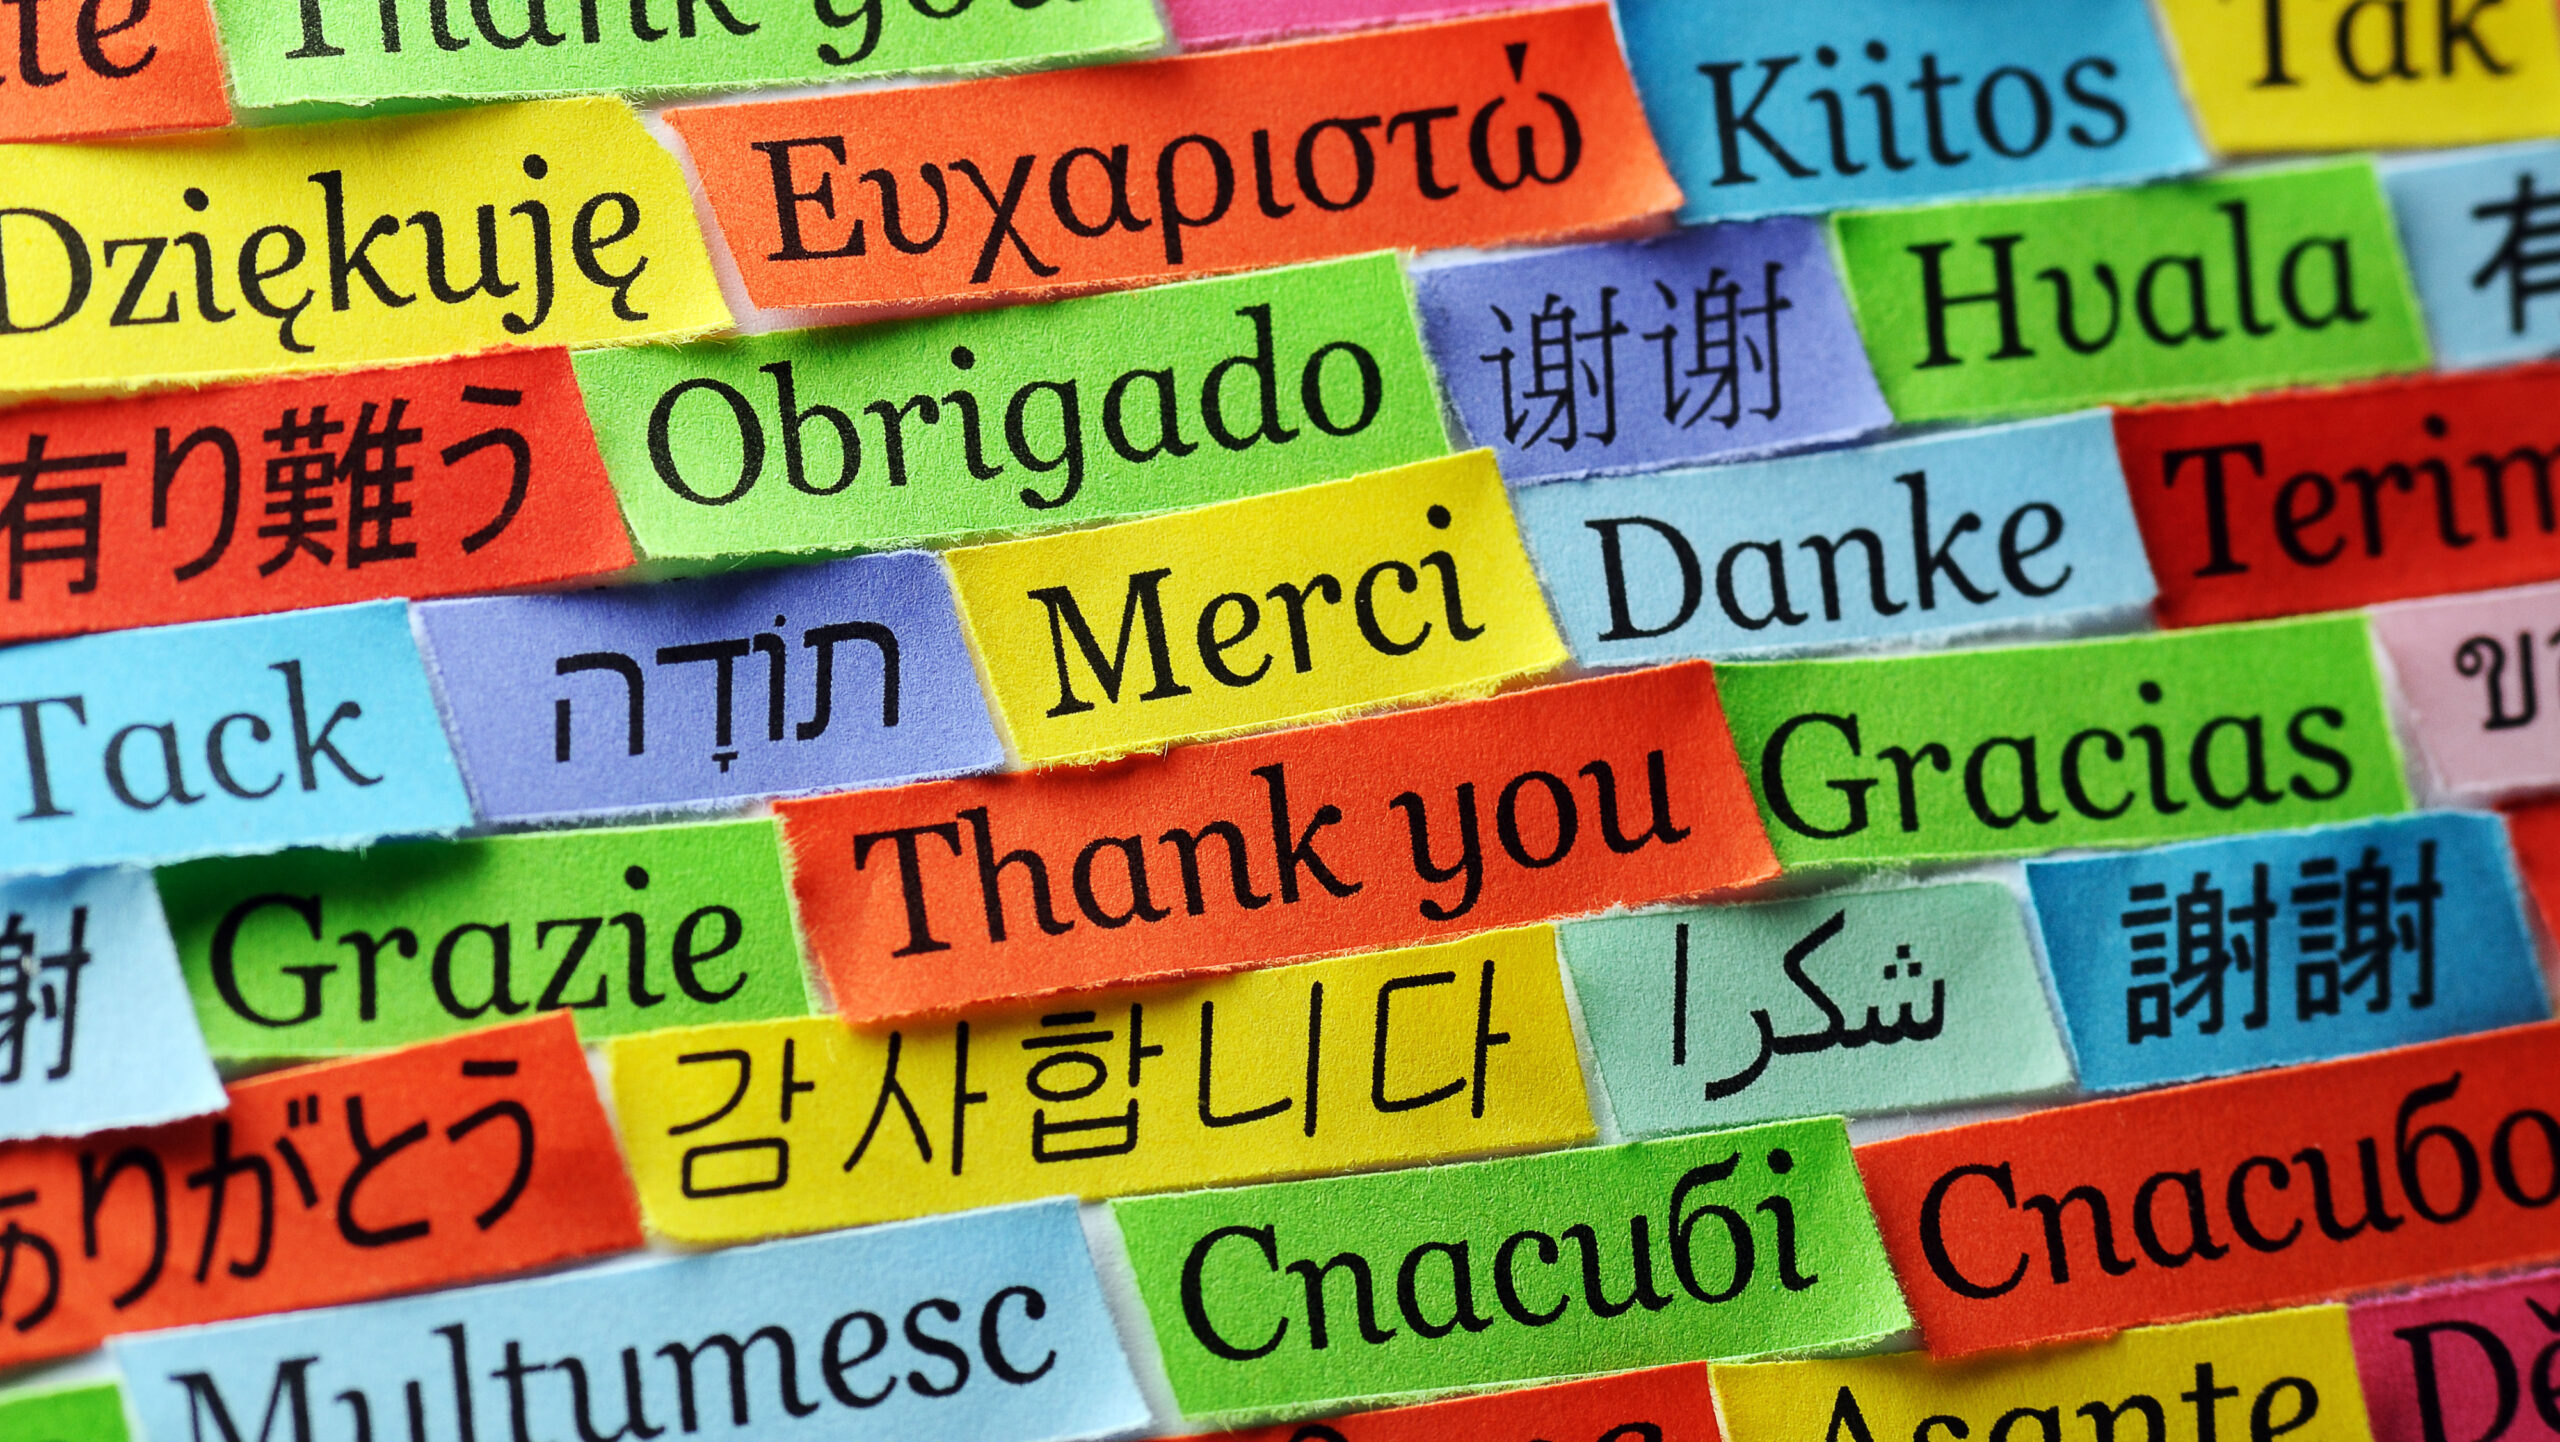 Post it notes of the words "Thank You" in different languages.